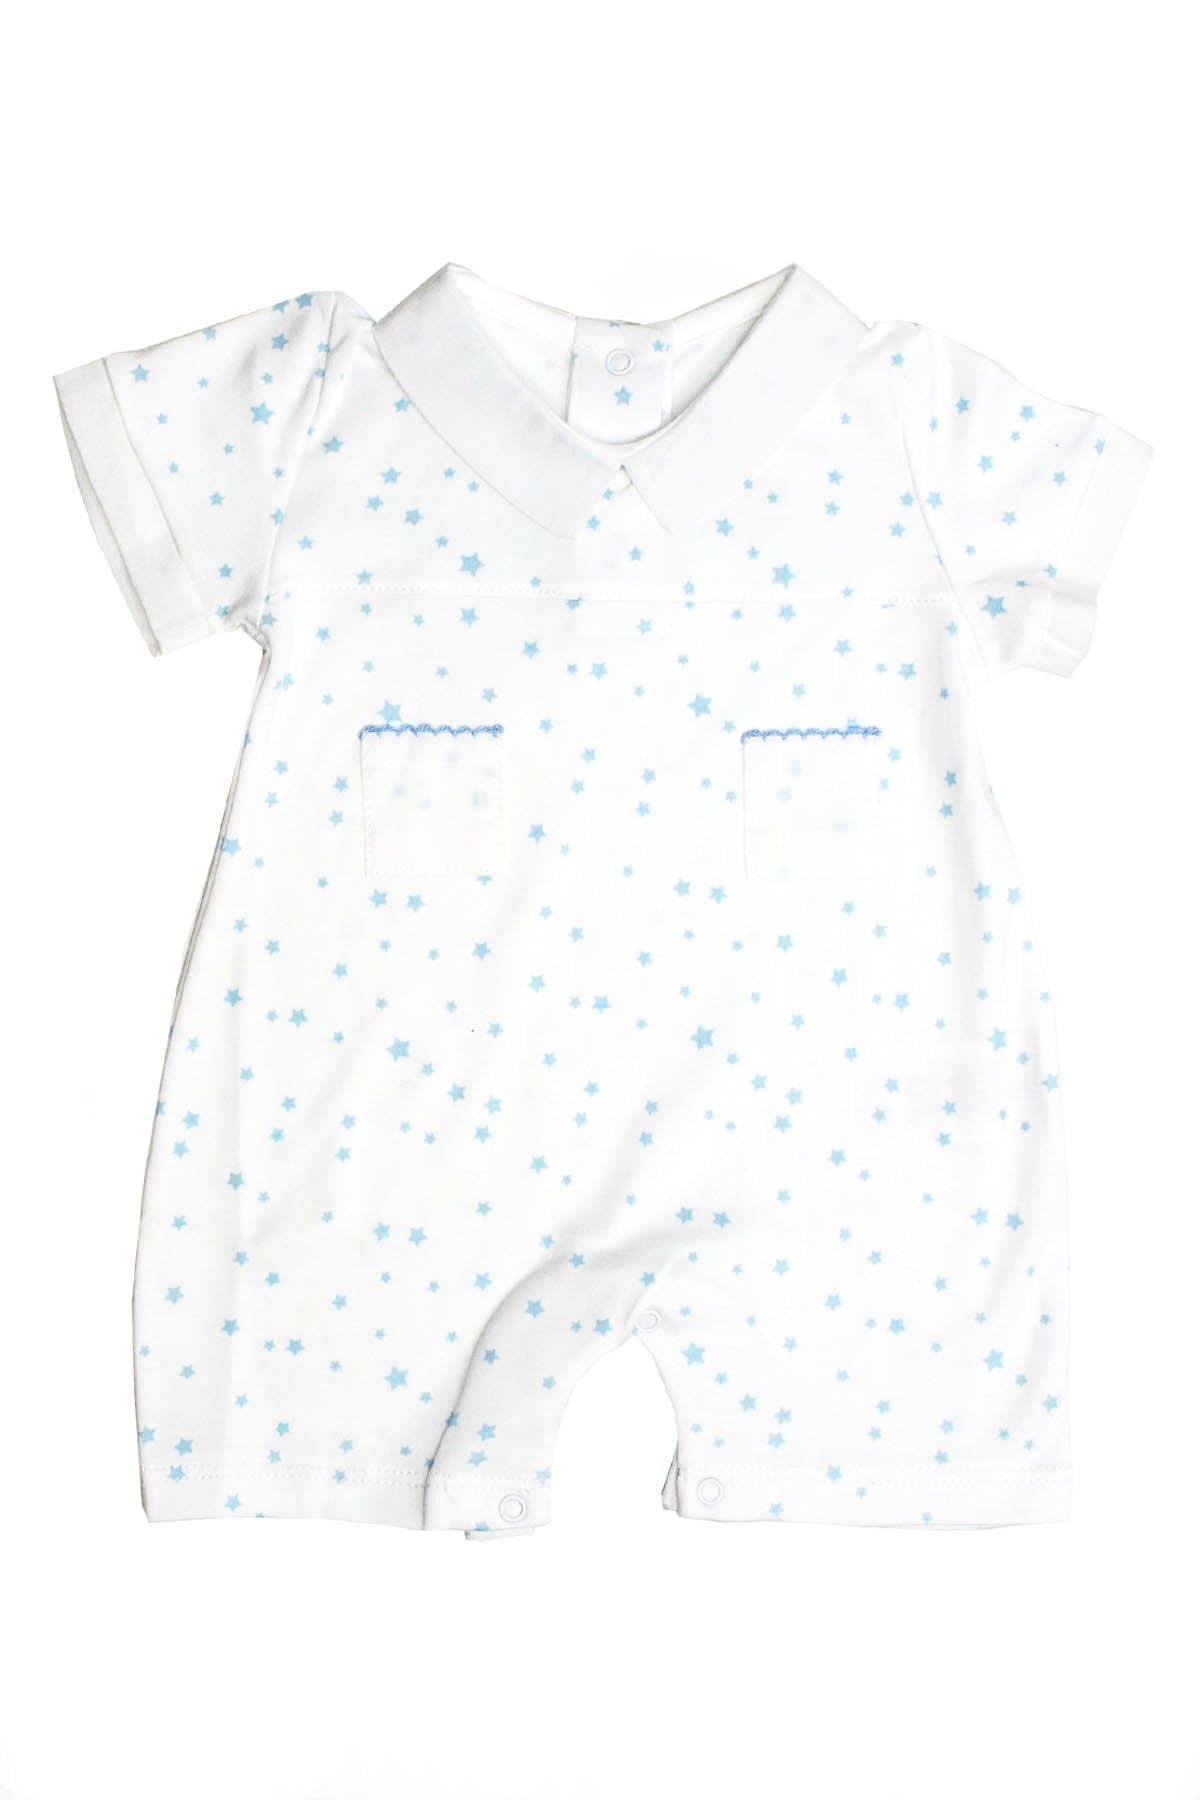 Cotton White Rompers and Pajama with blue stars Pima Cotton